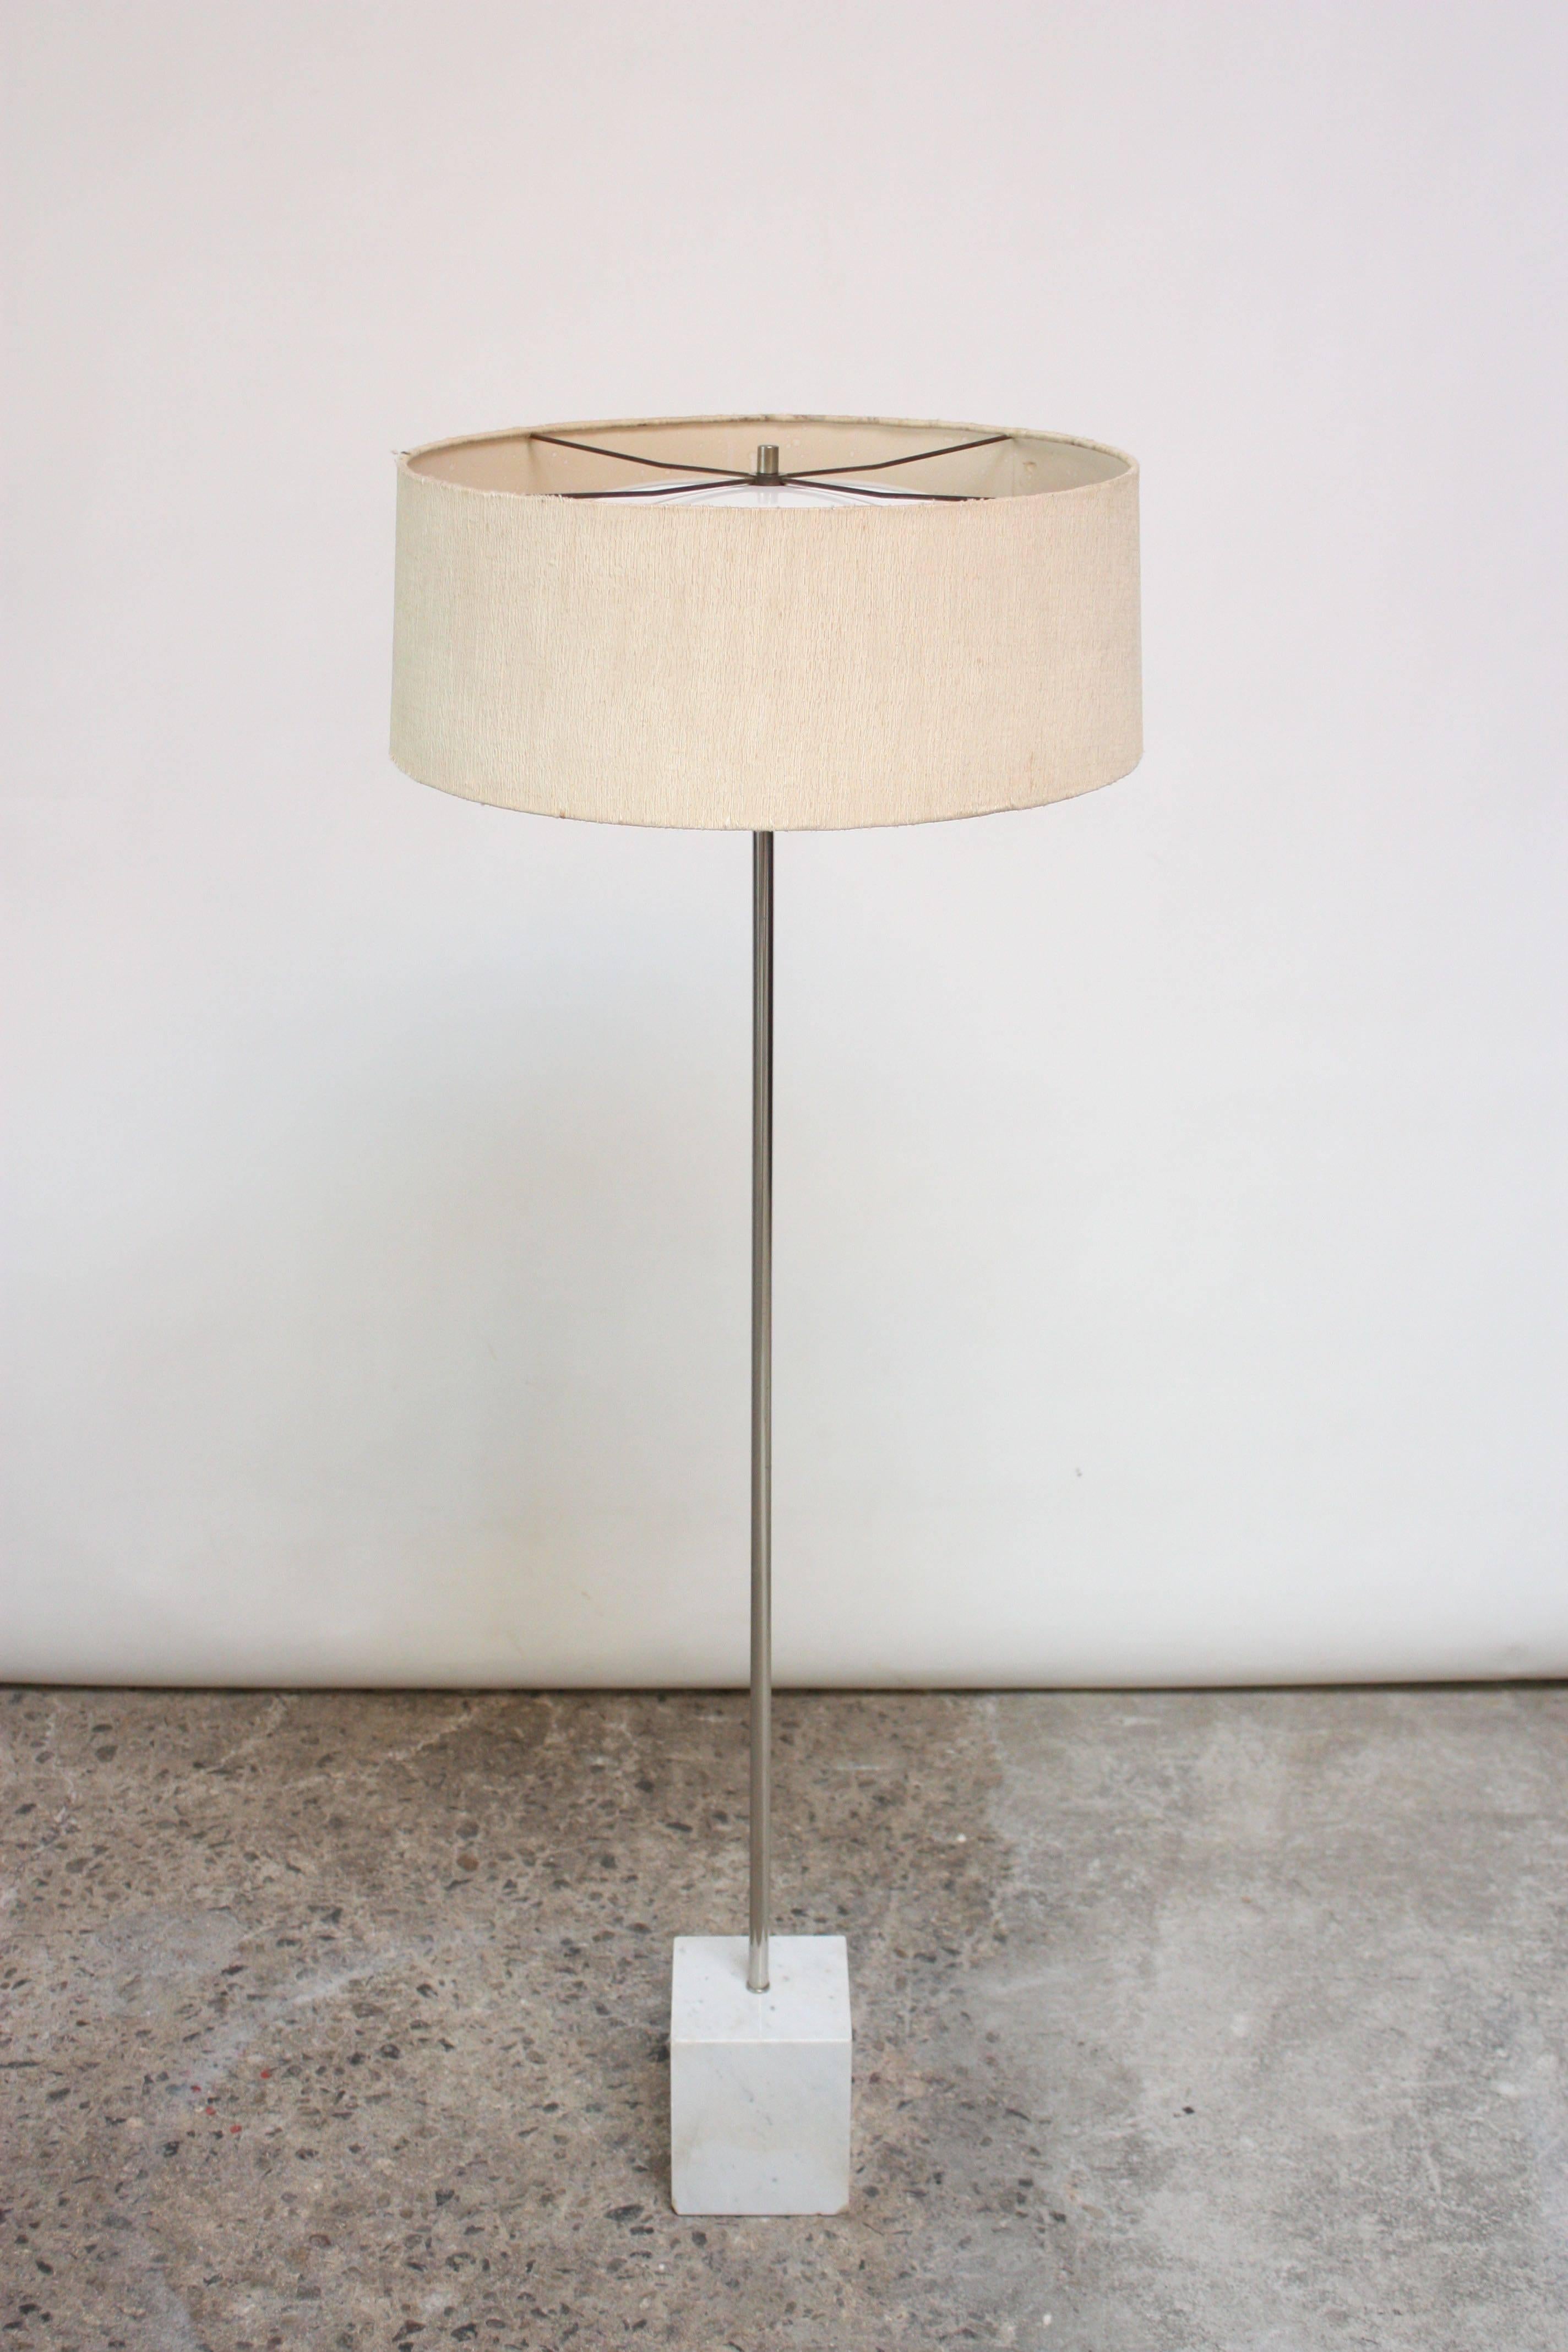 Laurel floor lamp with square marble base and chromed-metal rod. Features three socket illumination, newly rewired and ready for immediate use. Includes period cylindrical shade with top and bottom diffusers for even distribution of light.
Minor